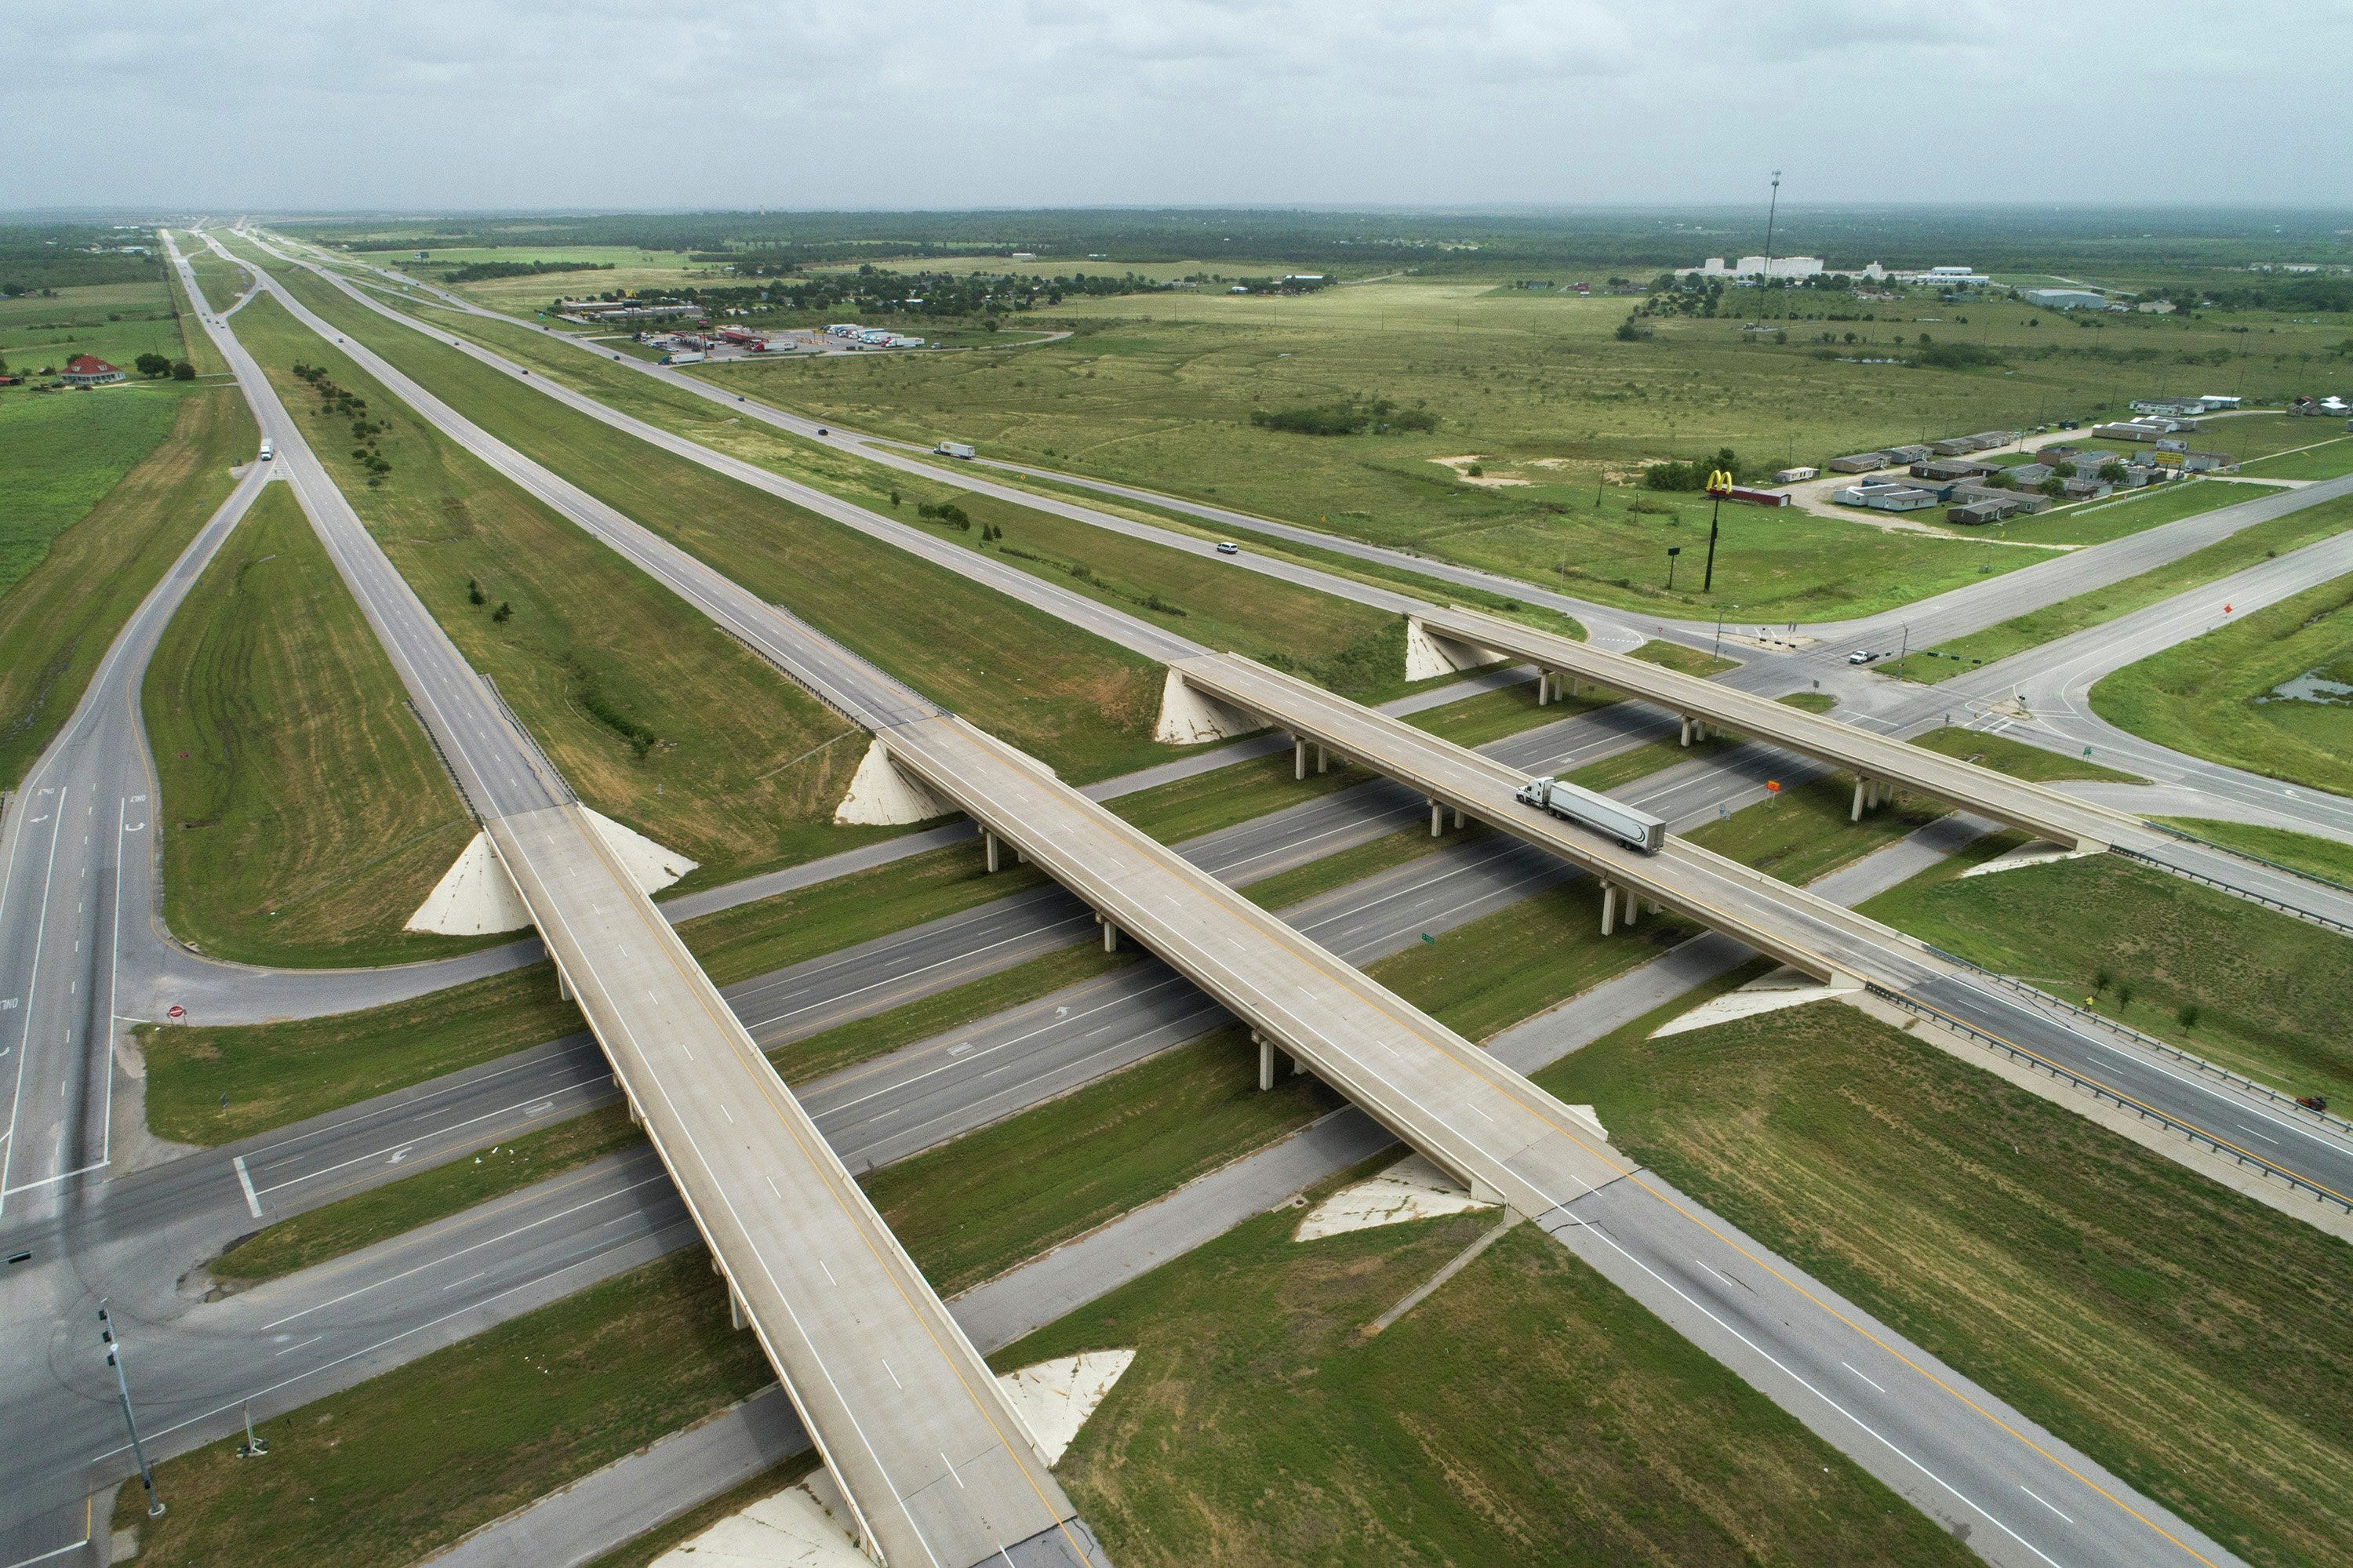 How population growth led Texas to rely on building toll roads